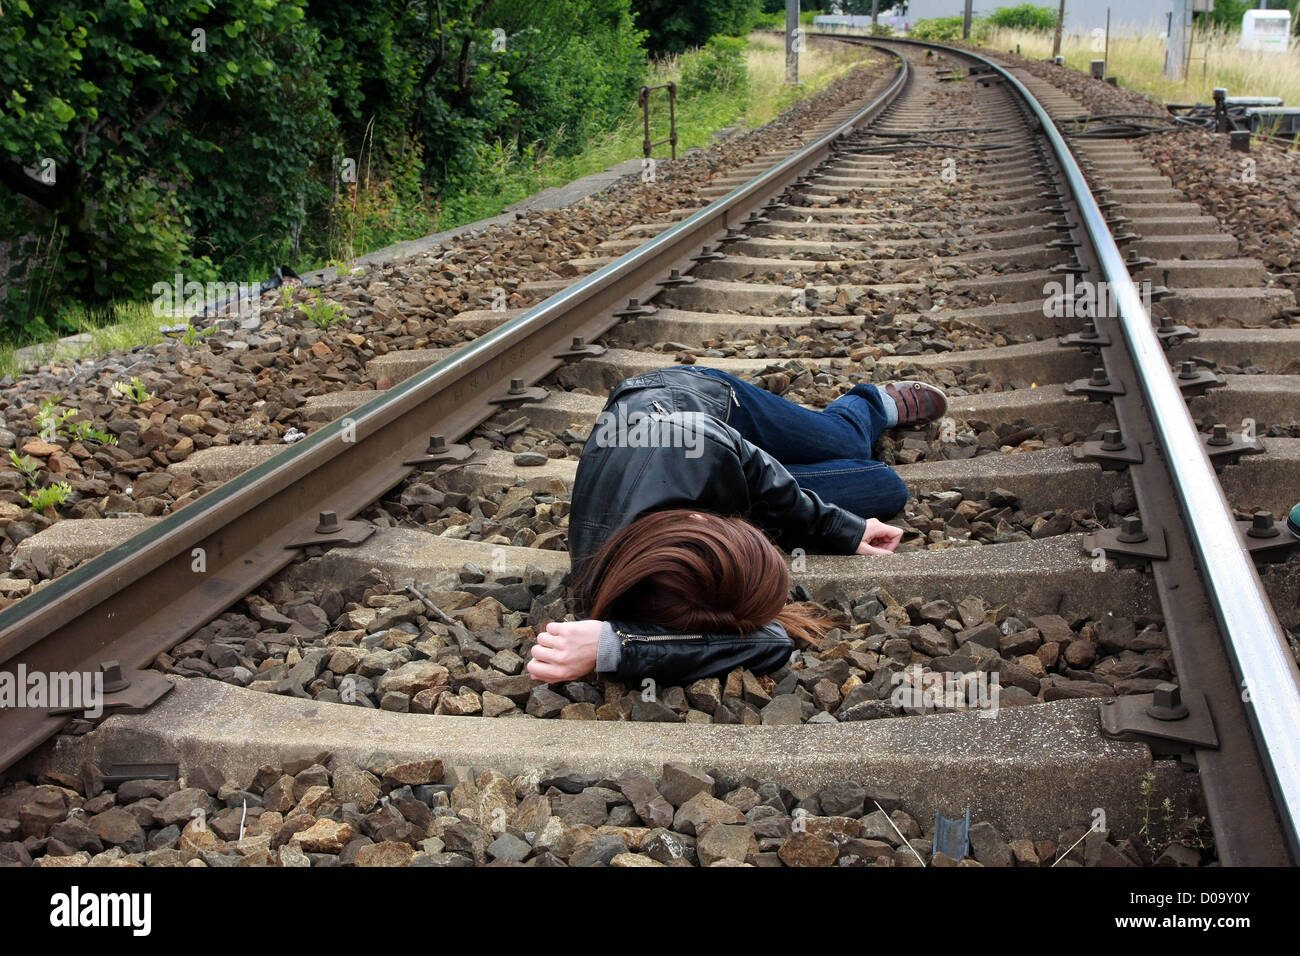 ILLUSTRATION SUICIDE YOUNG WOMAN ON THE RAILWAY TRACKS BRIDES-LES-BAINS (73) SAVOY FRANCE Stock Photo